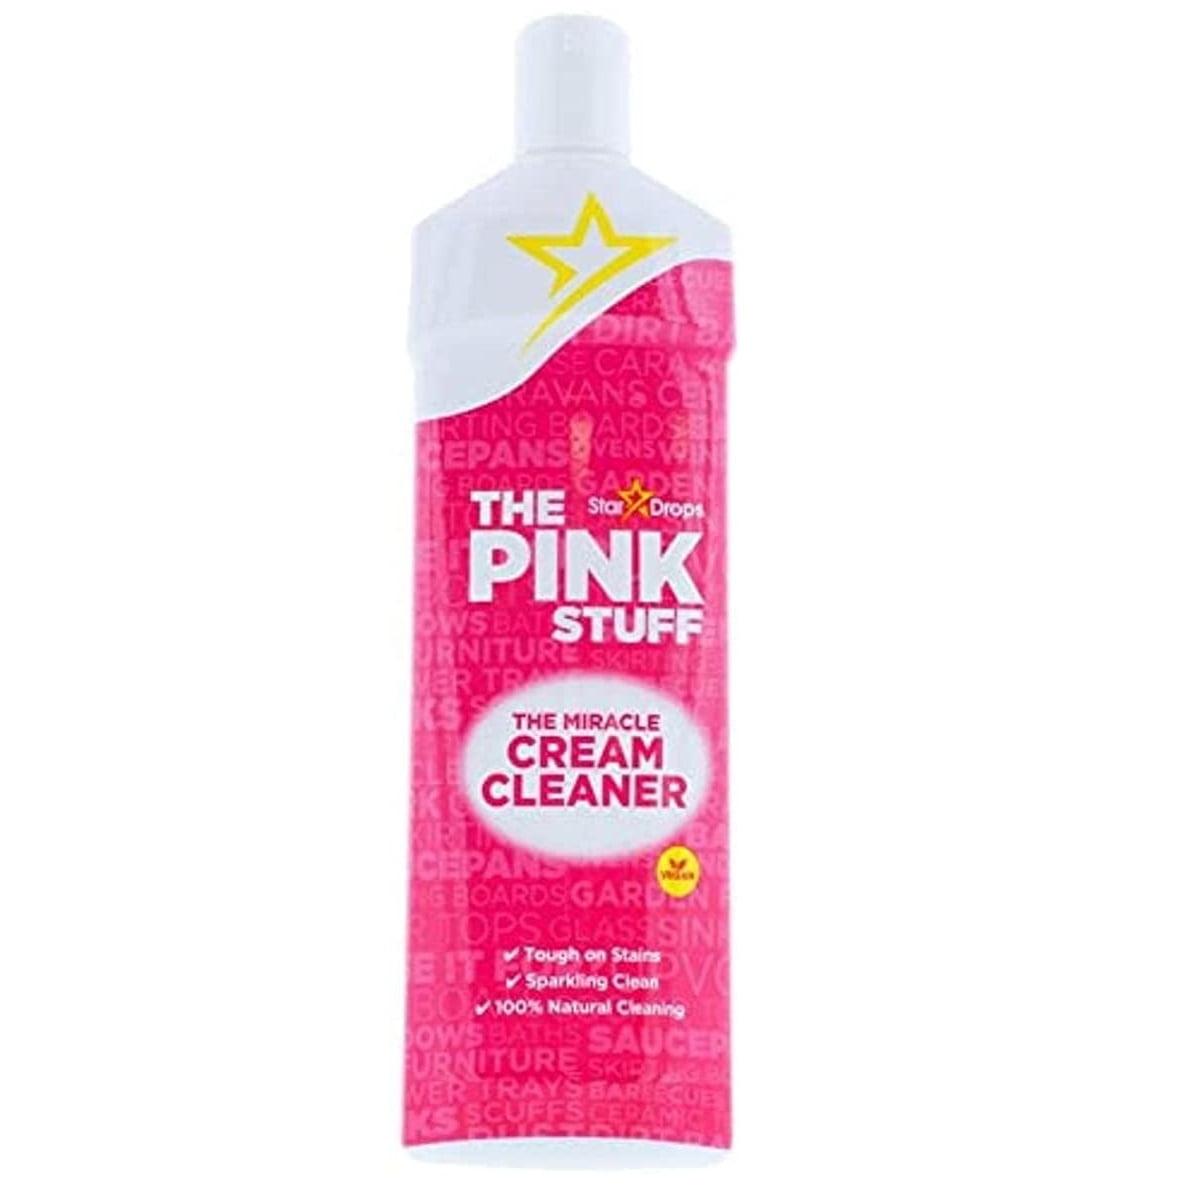 Miracle Cream розовый. The Pink stuff паста. The Pink stuff. Clean up крем